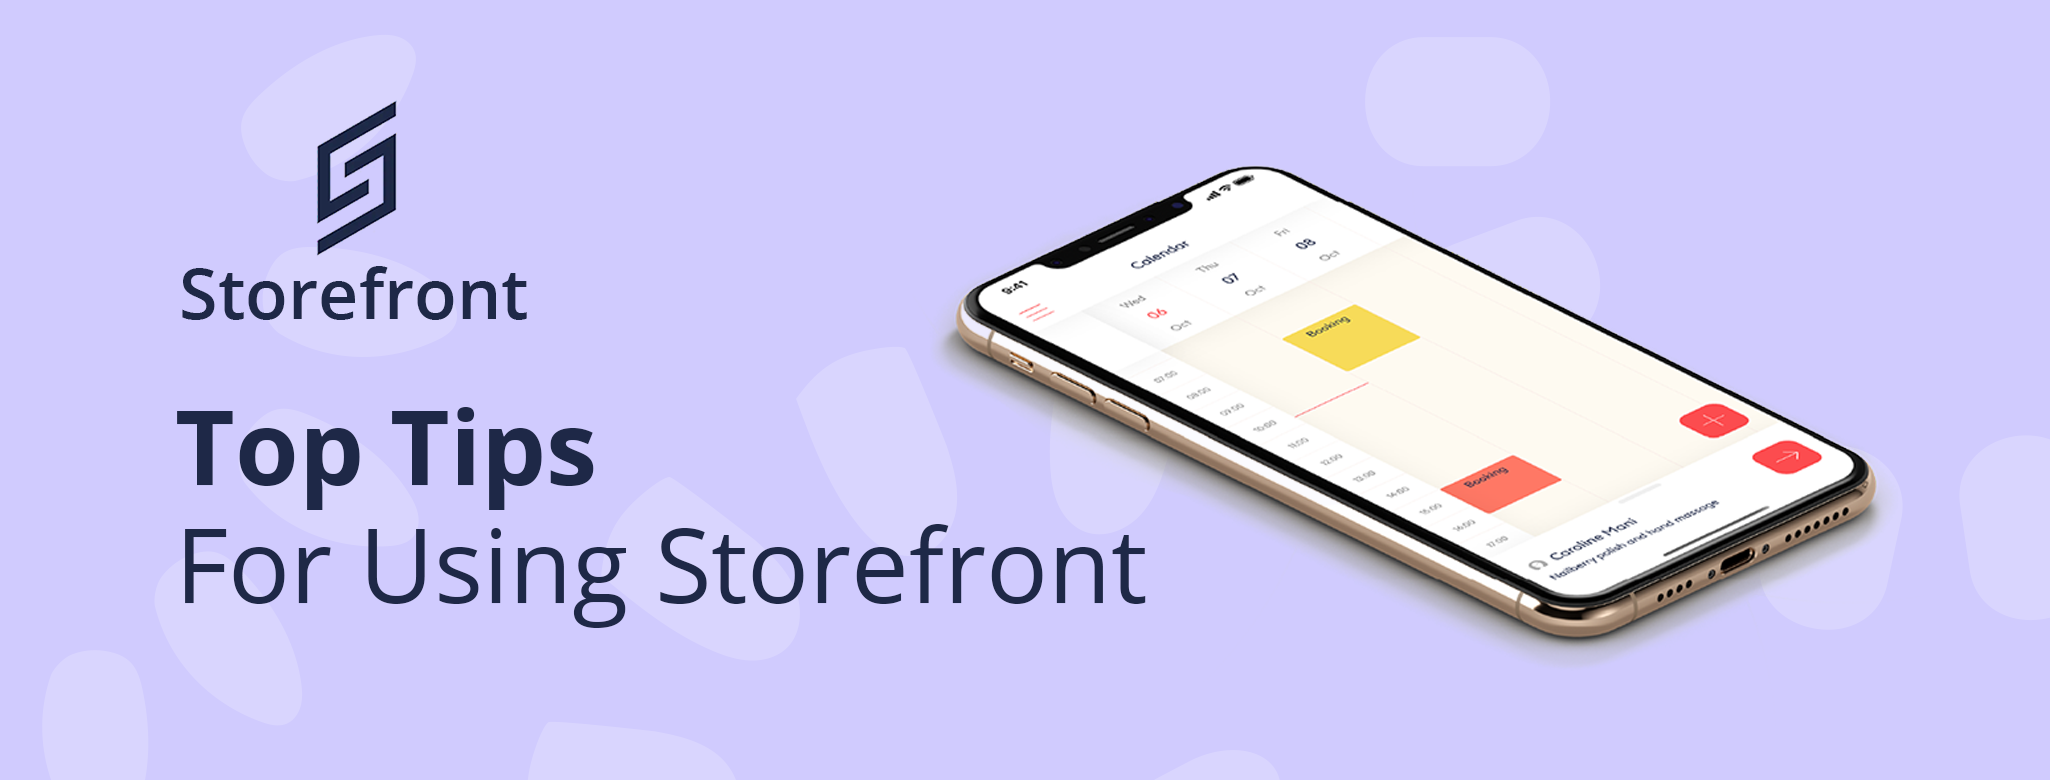 Top Tips For Using Storefront